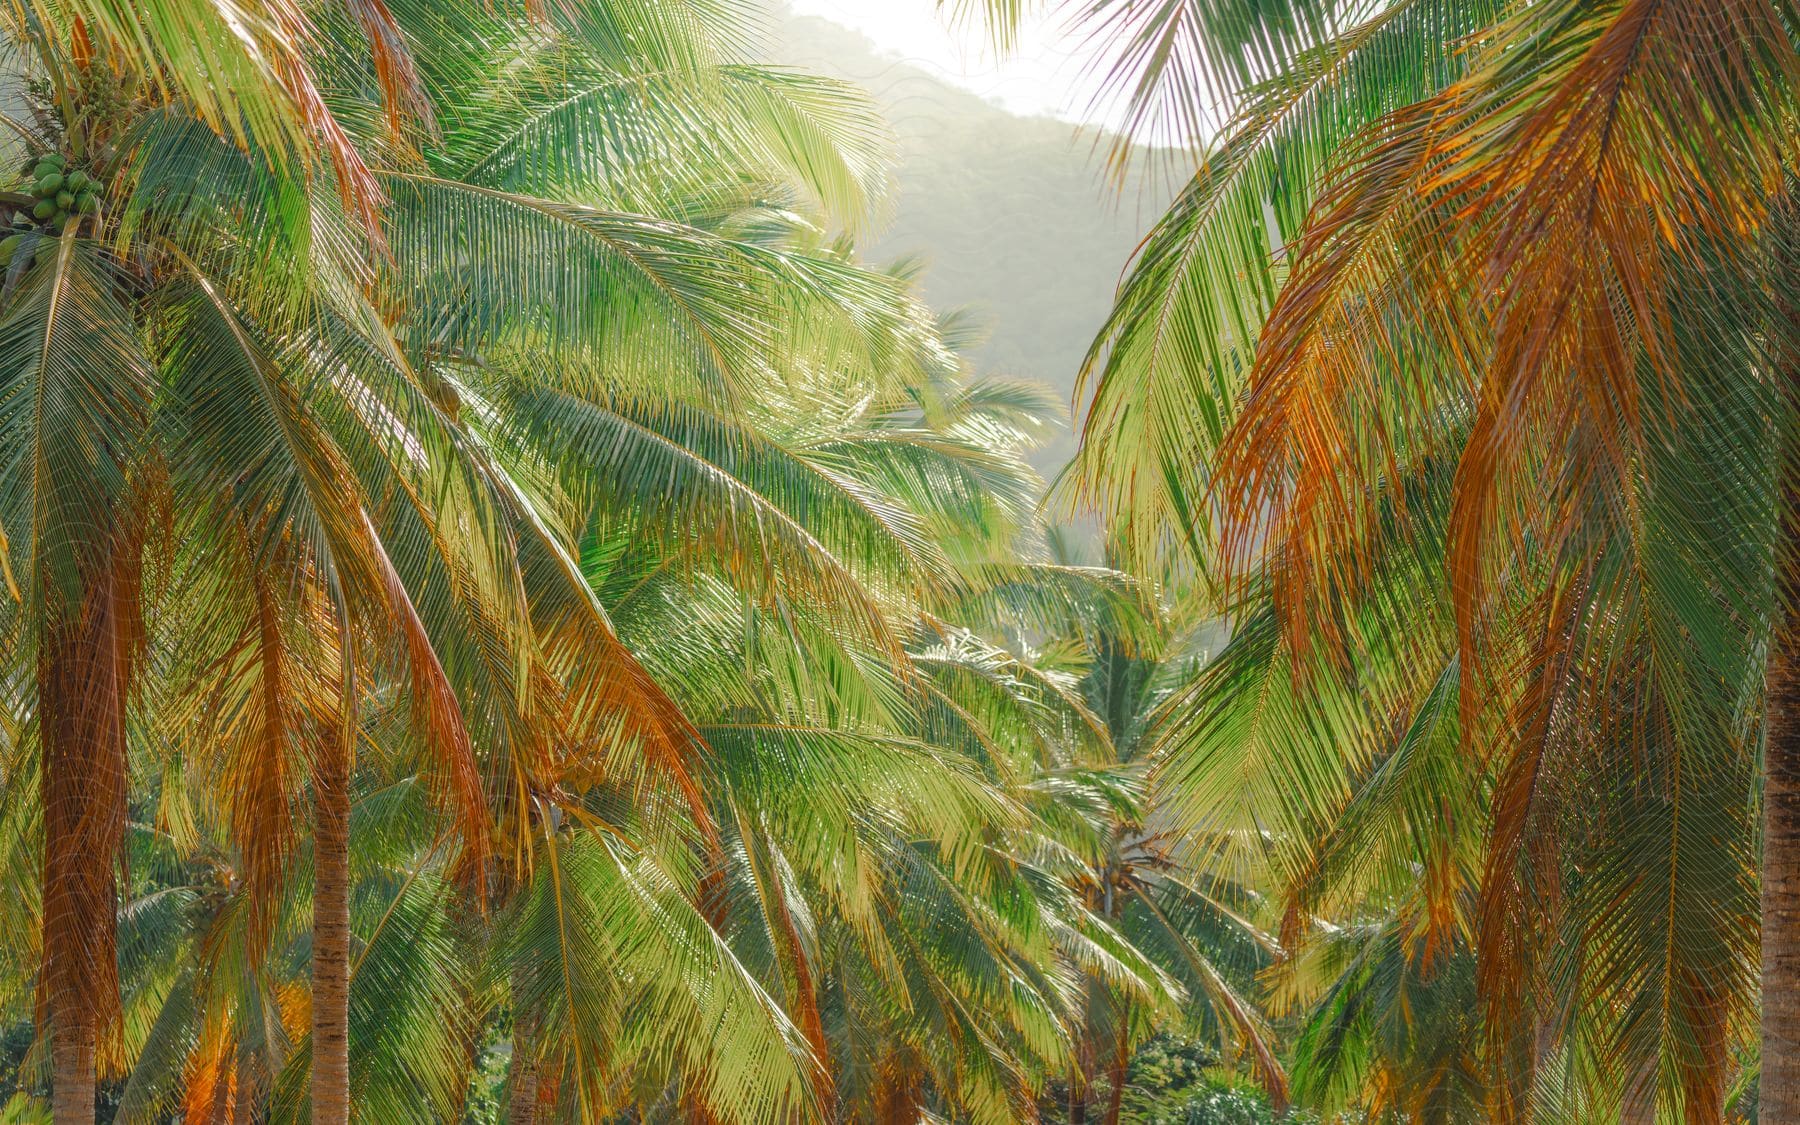 Set of palm trees under soft light with a tropical atmosphere.